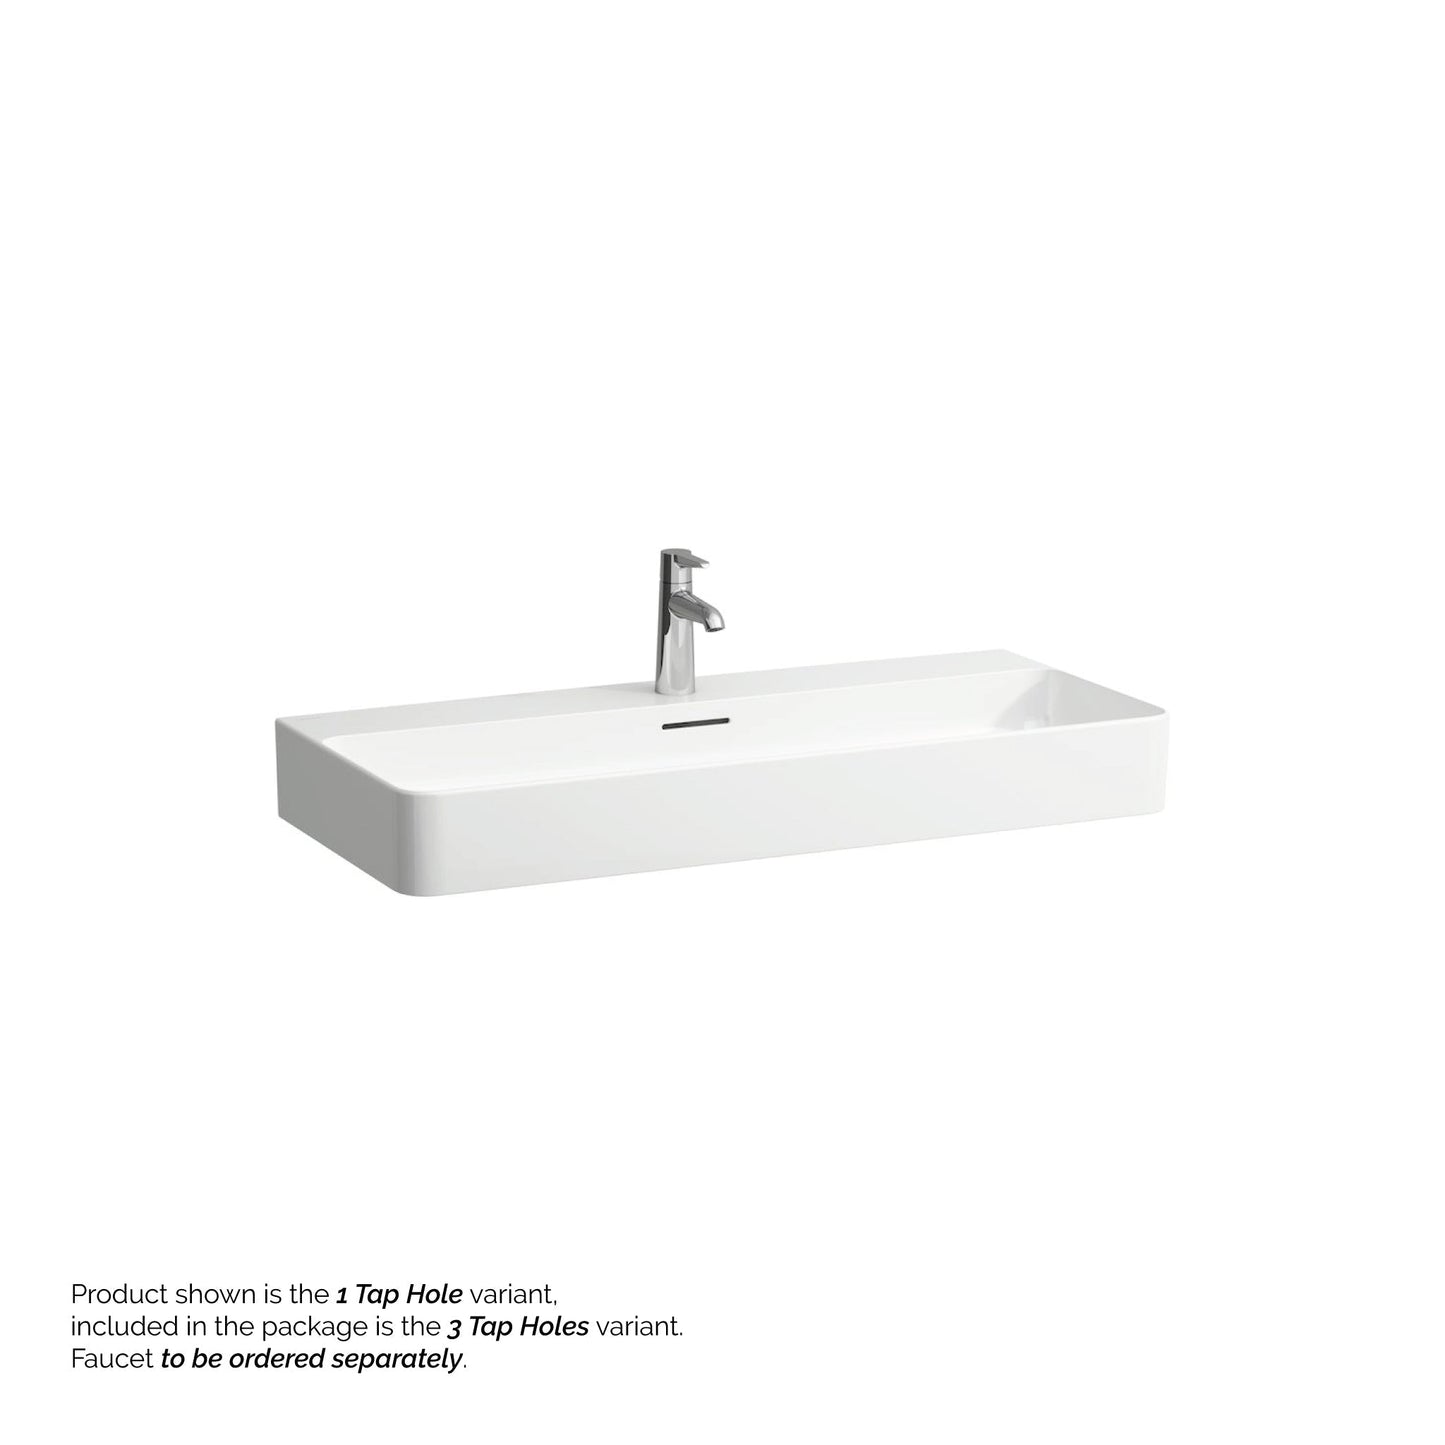 Laufen Val 37" x 17" Matte White Ceramic Wall-Mounted Bathroom Sink With 3 Faucet Holes